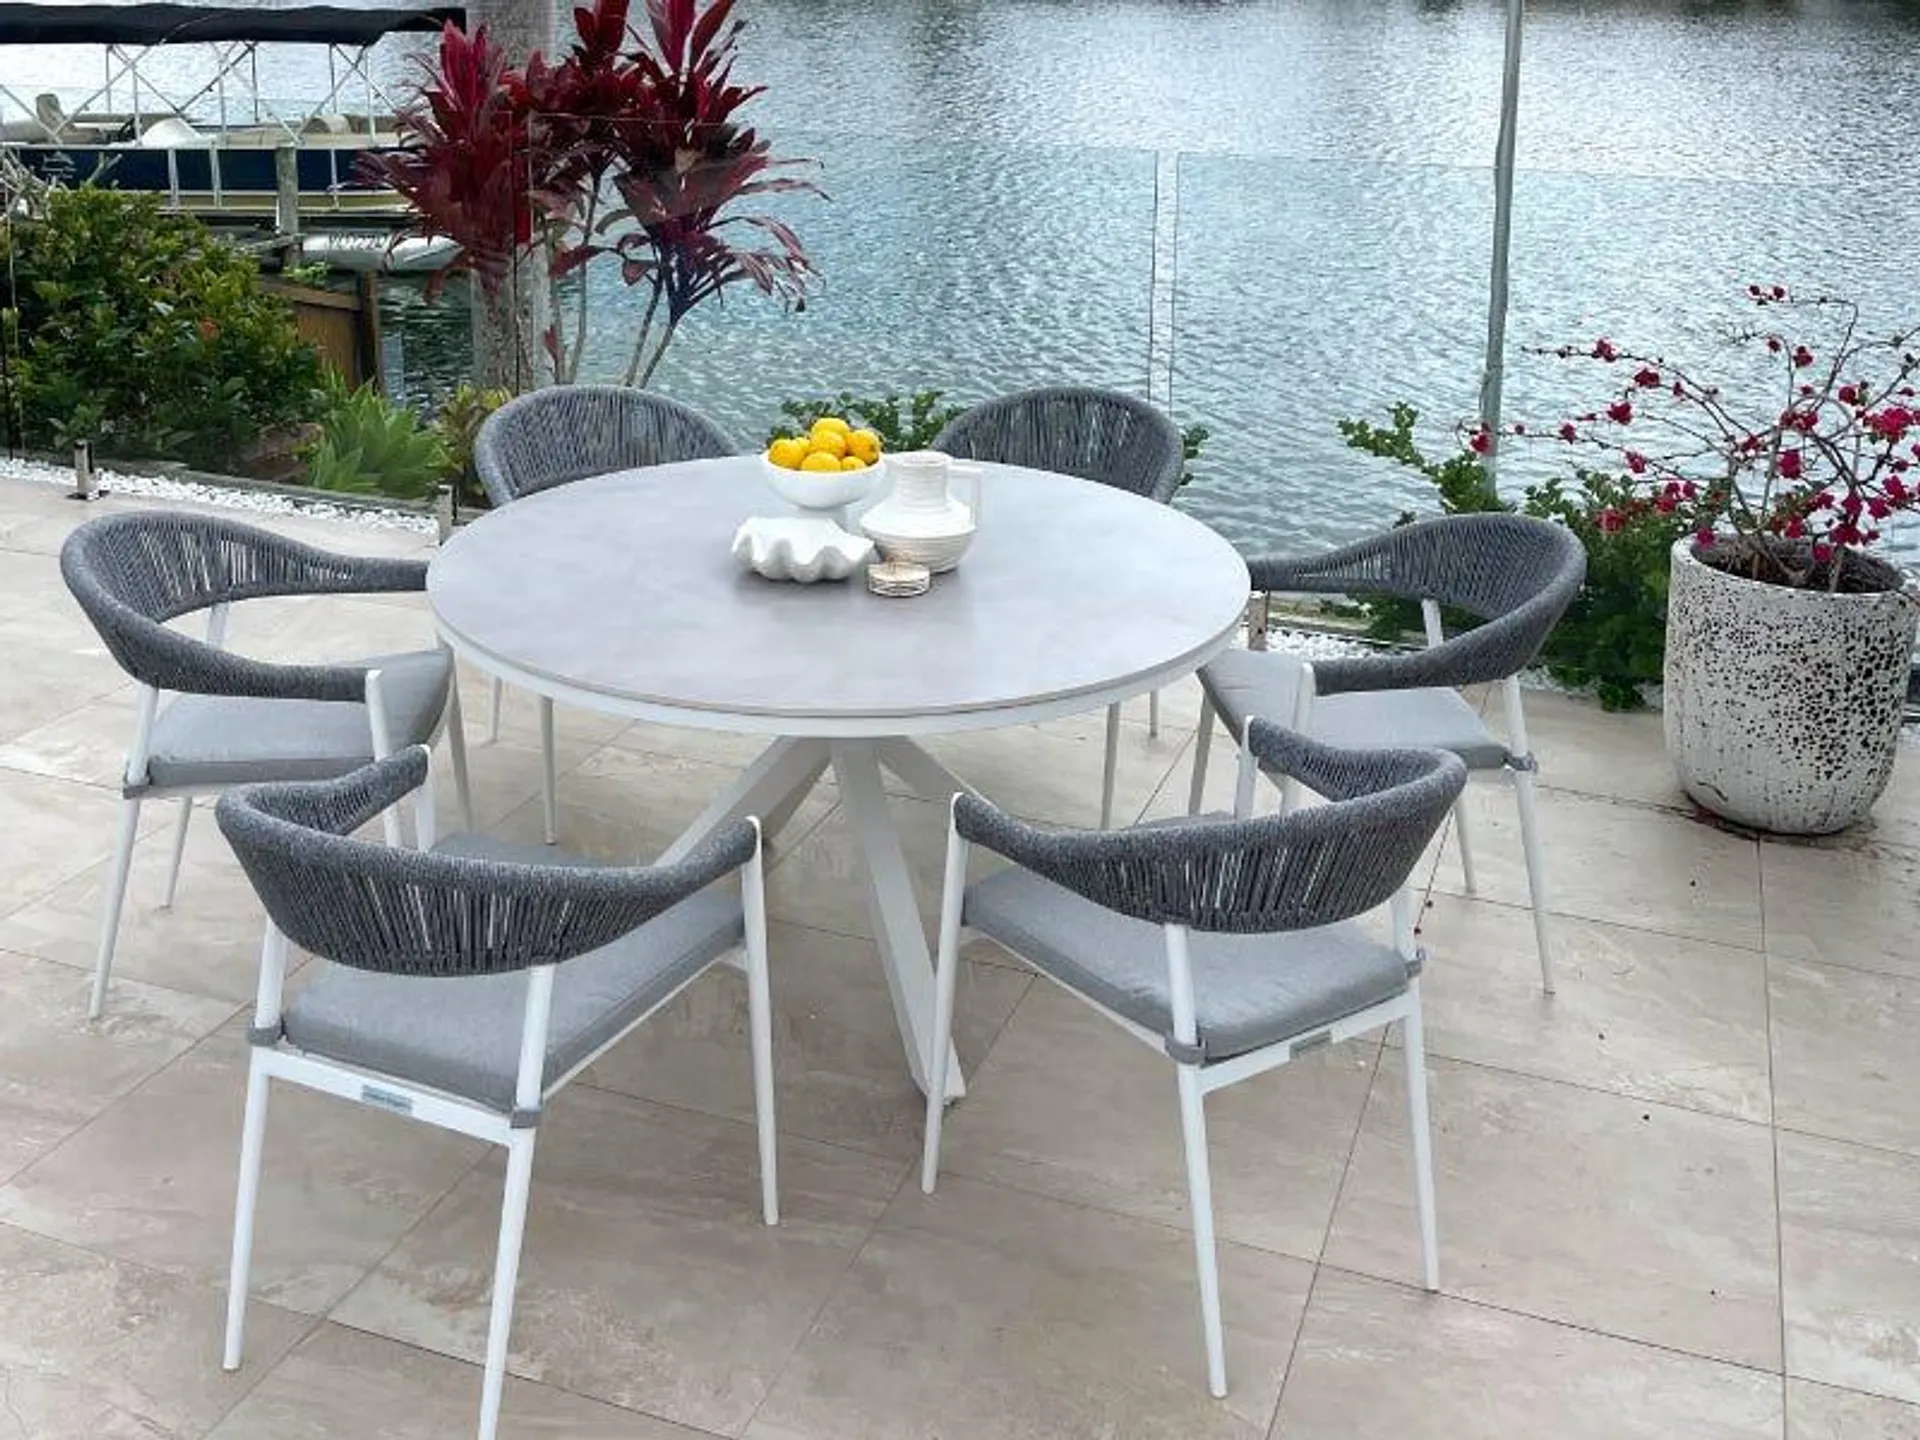 Adele Round Ceramic Table with Nivala Chairs 7pc Outdoor Dining Setting